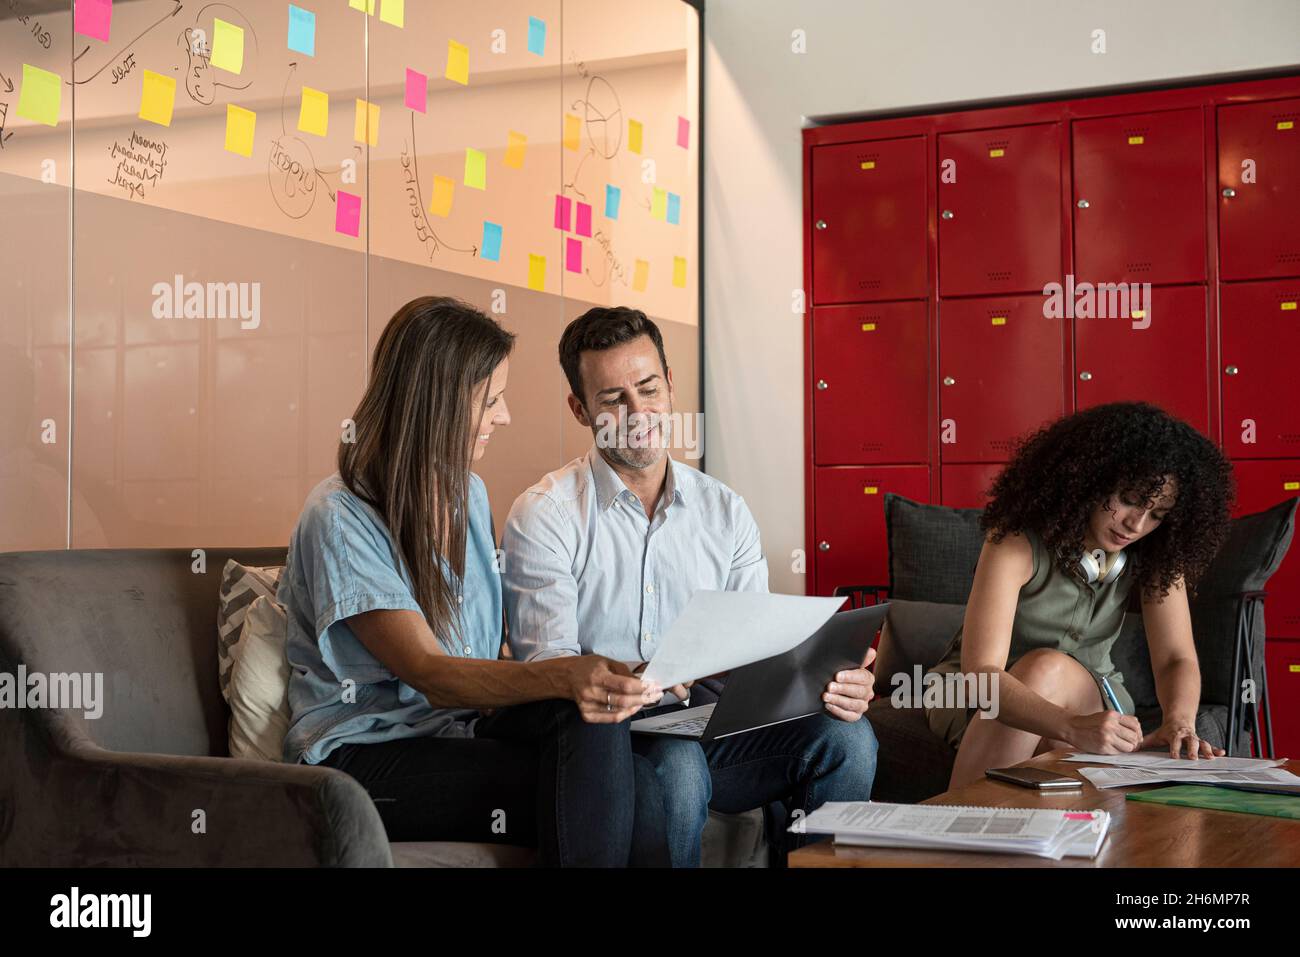 Business people working together in office Stock Photo